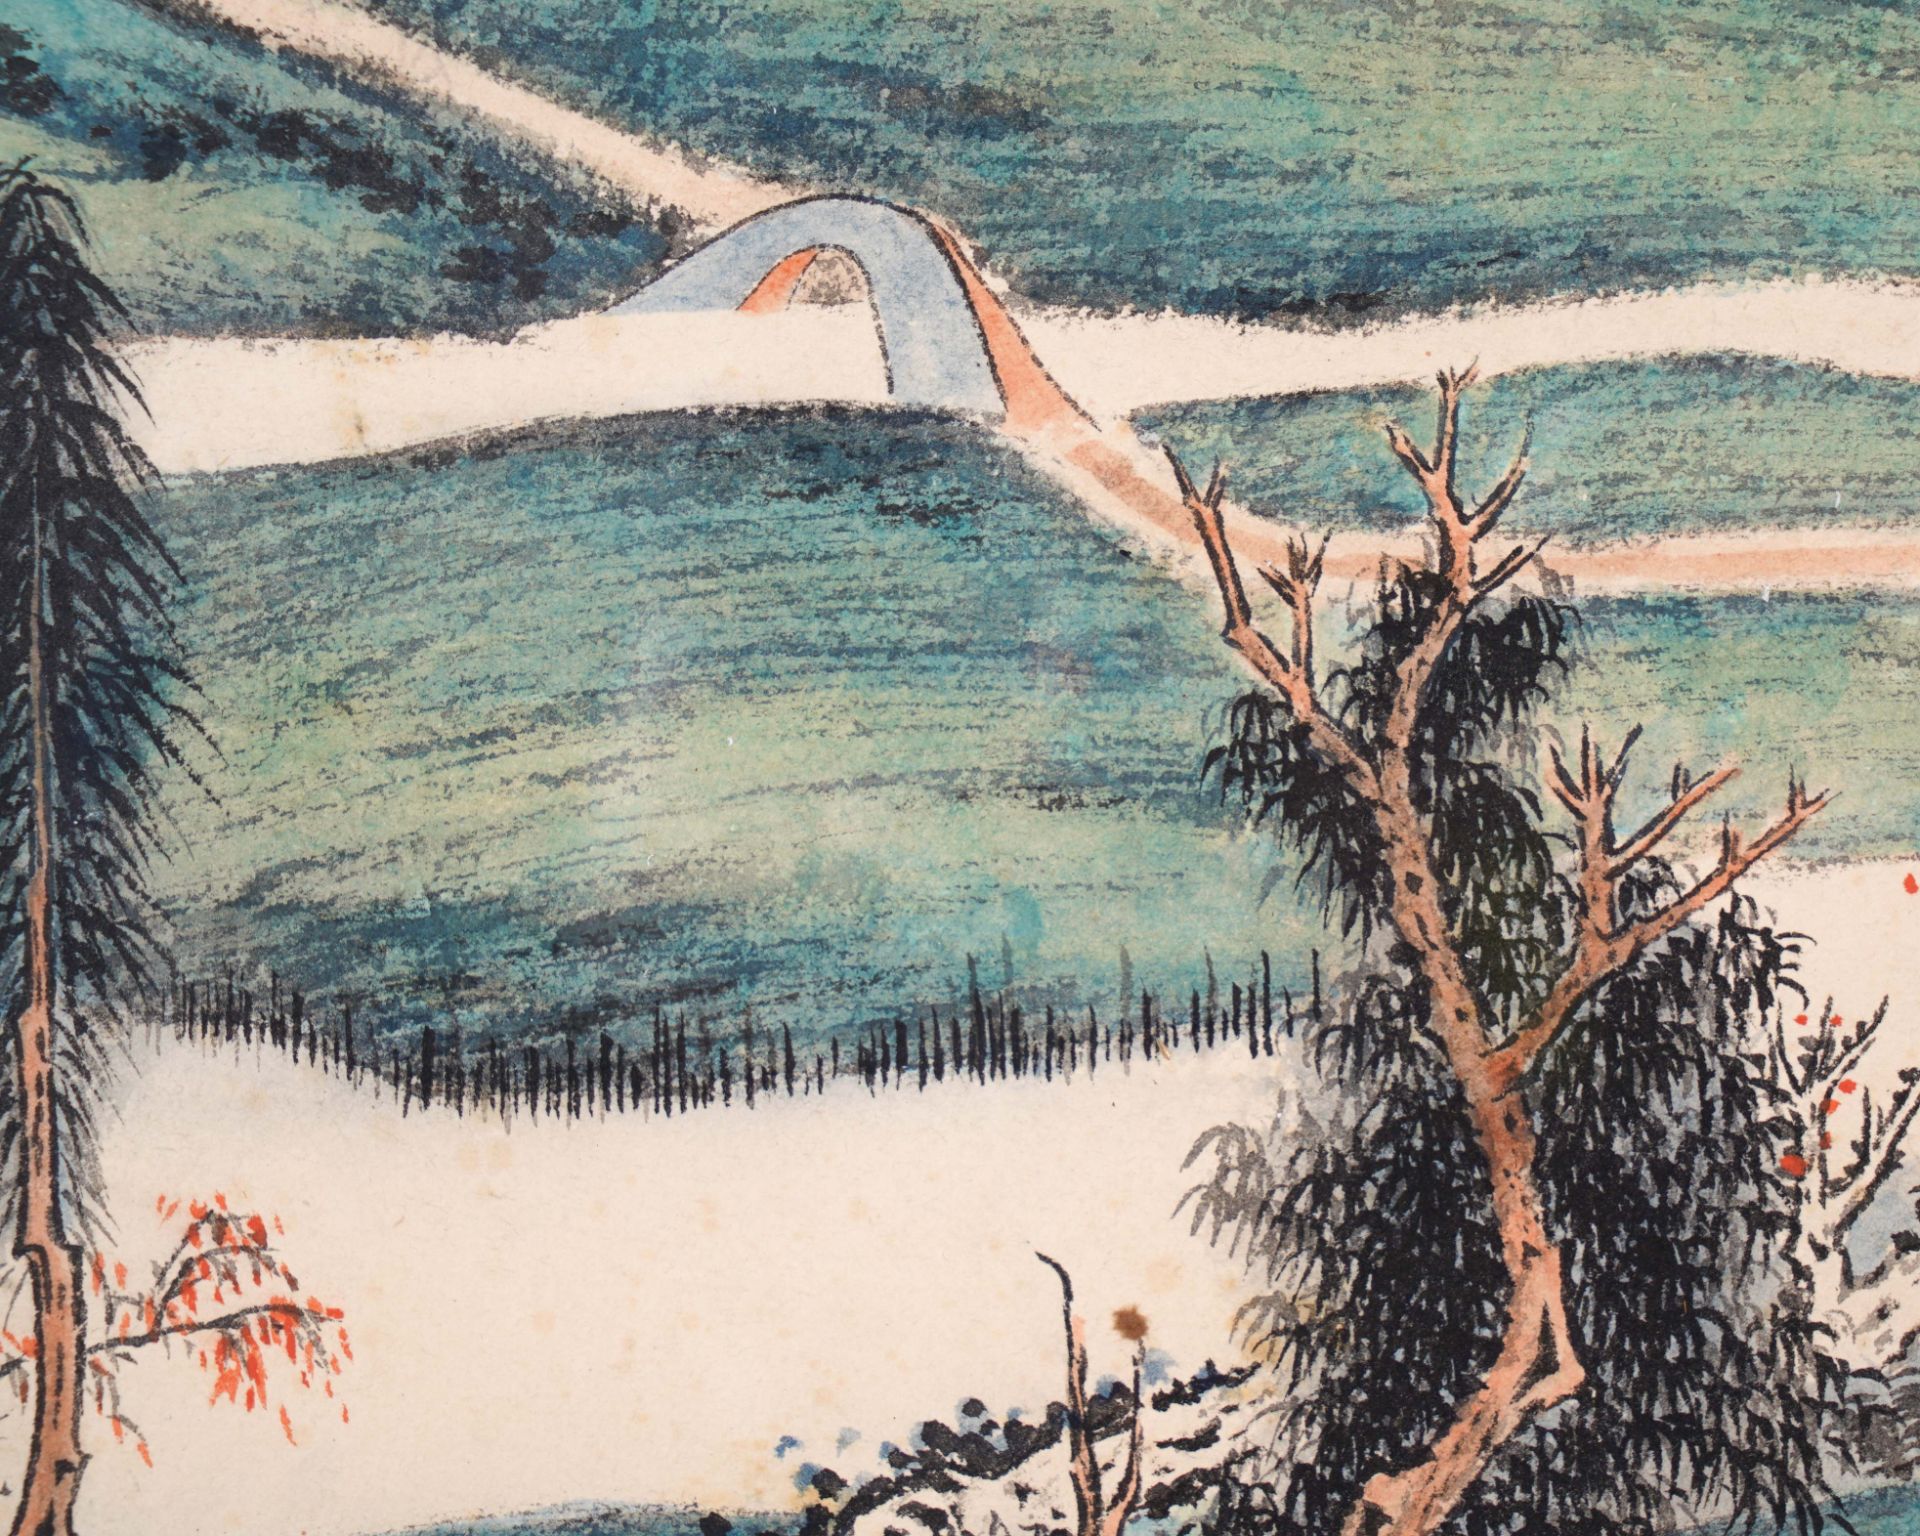 A Chinese Frame Painting By Zhang Daqian - Image 10 of 19